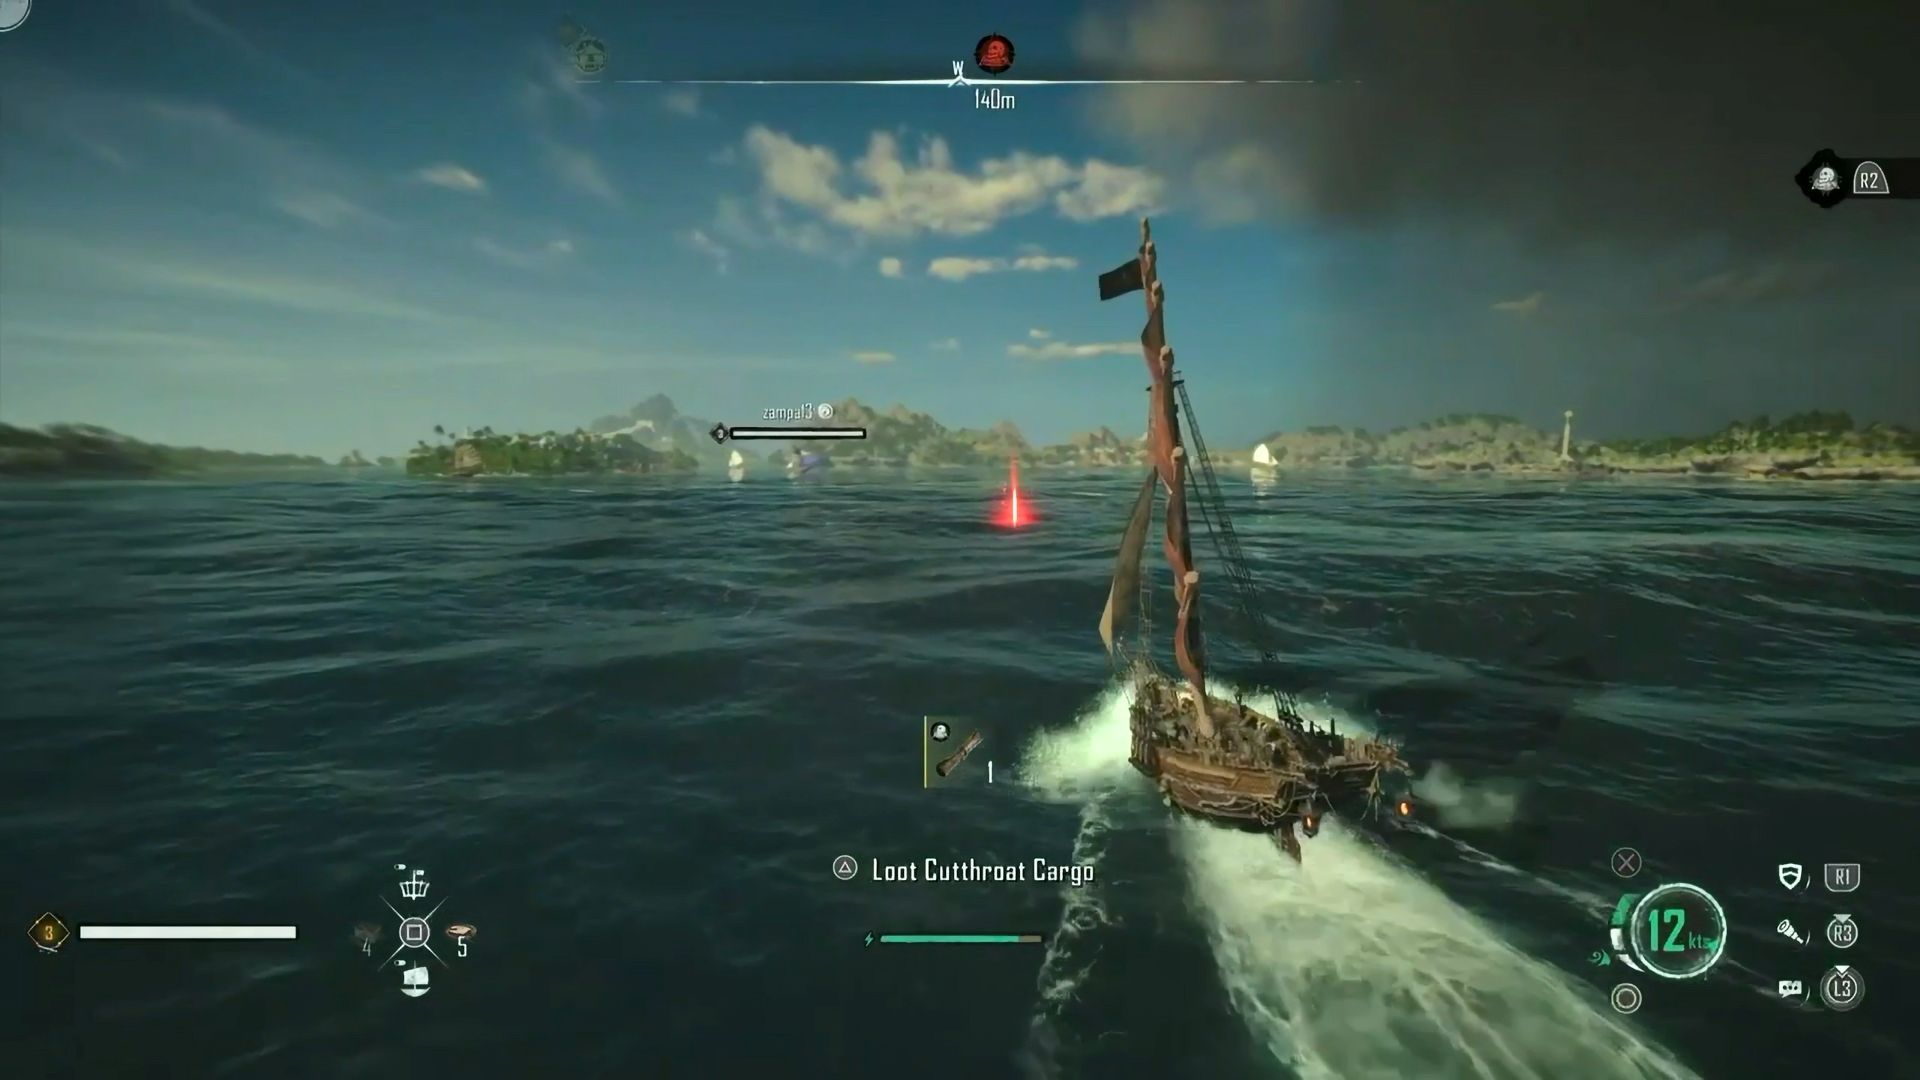 A player attempting to loot Cut-Throat Cargo in Skull and Bones